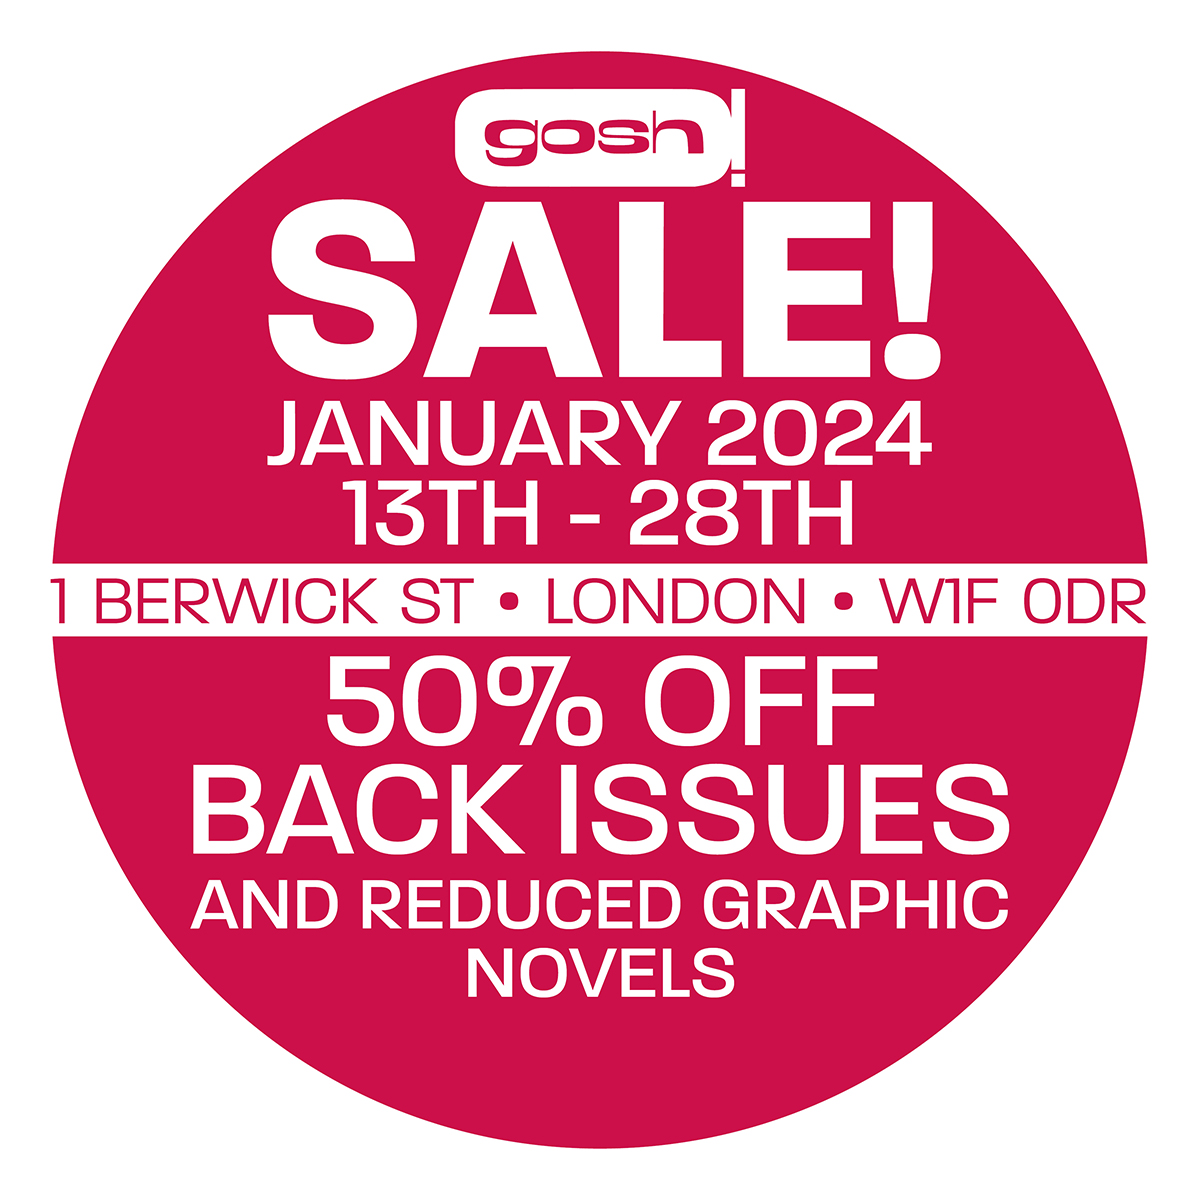 Our January sale ends tomorrow!! This weekend is your last chance to grab some amazing bargains. With 50% our entire back-issues and loads of reduced graphic novels, it's an opportunity you won't want to miss. Head down to the shop before 7pm on Sunday 28th January.